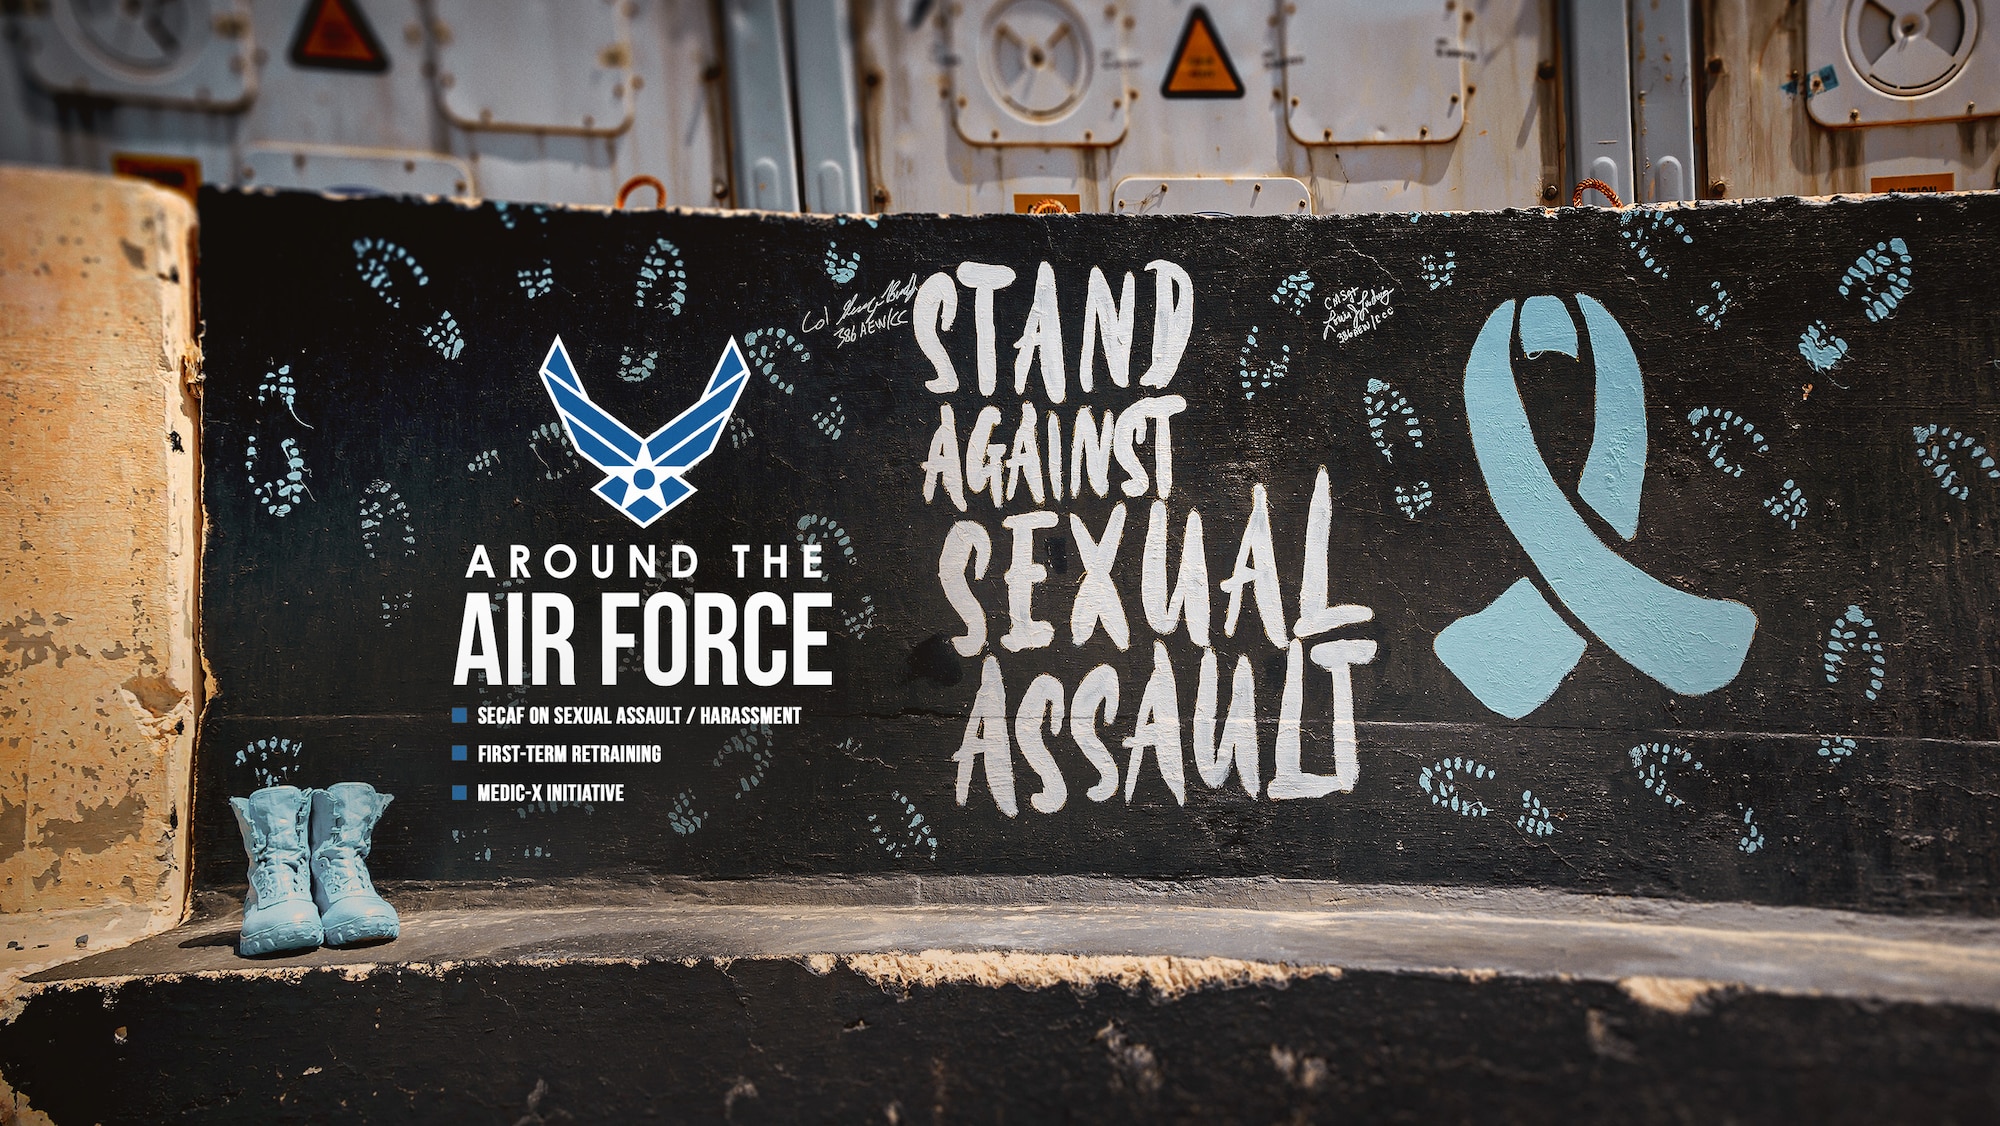 Around the Air Force SECAF on Sexual Assault, Harassment - First-term Retraining image